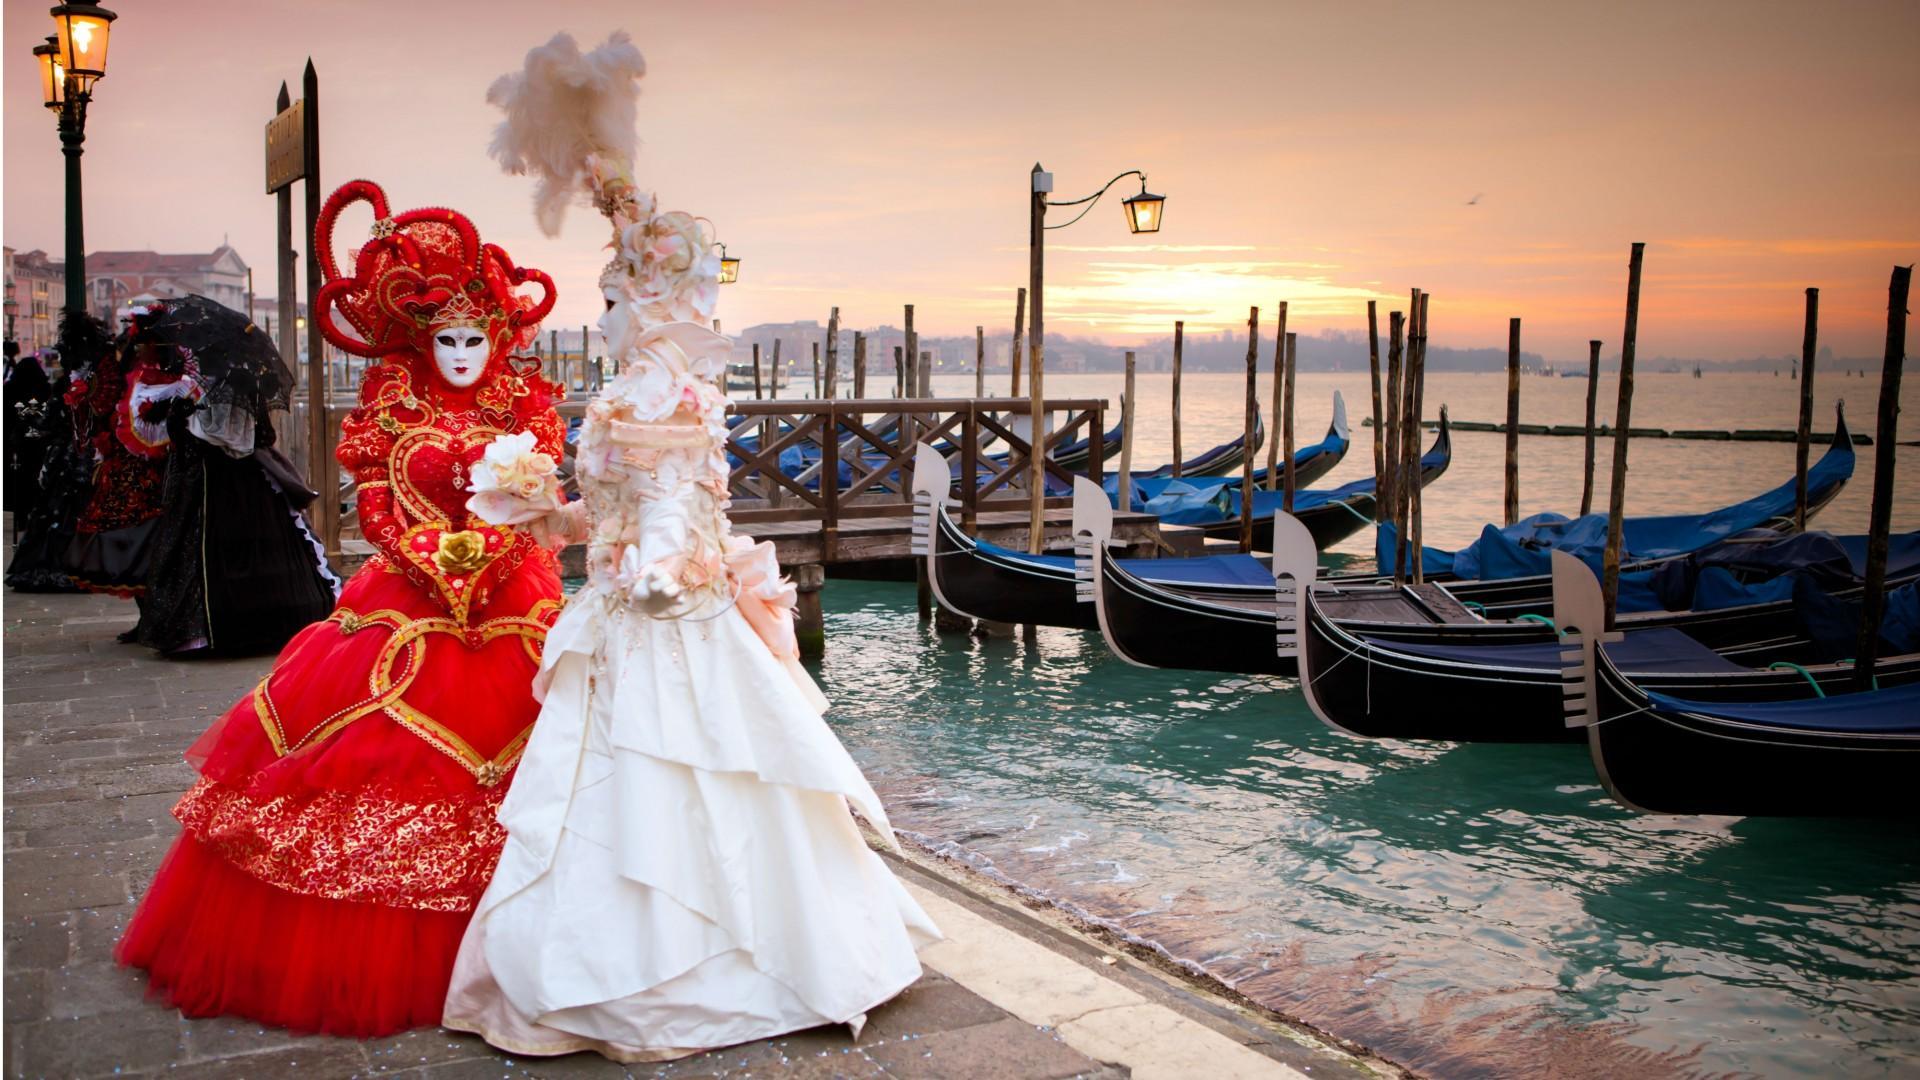 Venice Carnival Wallpapers Top Free Venice Carnival Backgrounds